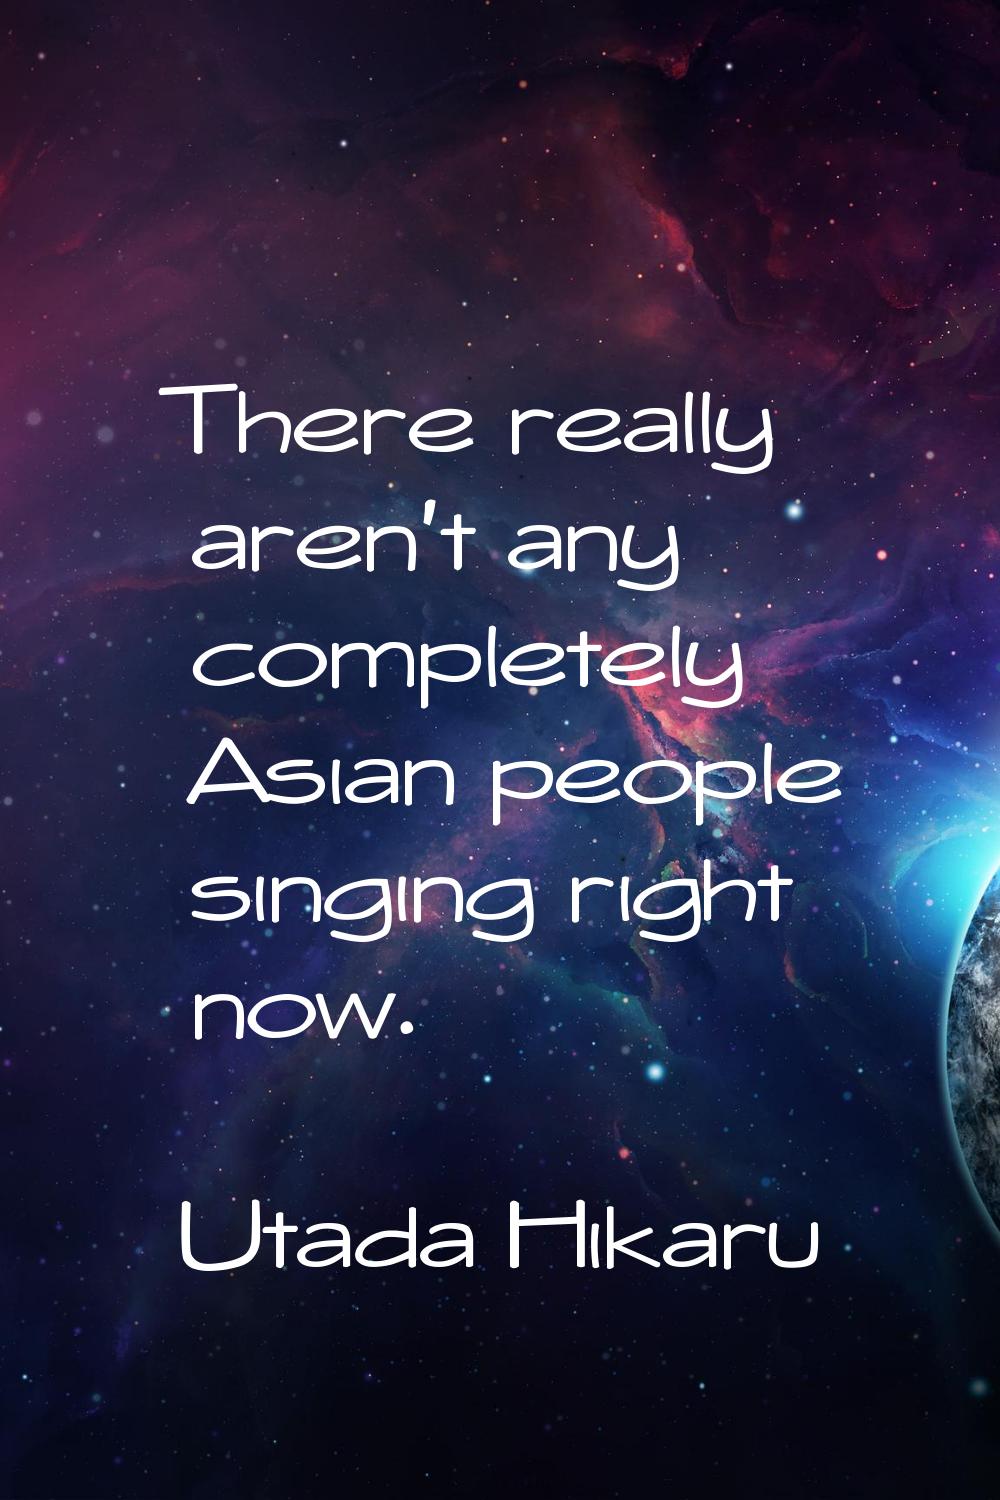 There really aren't any completely Asian people singing right now.